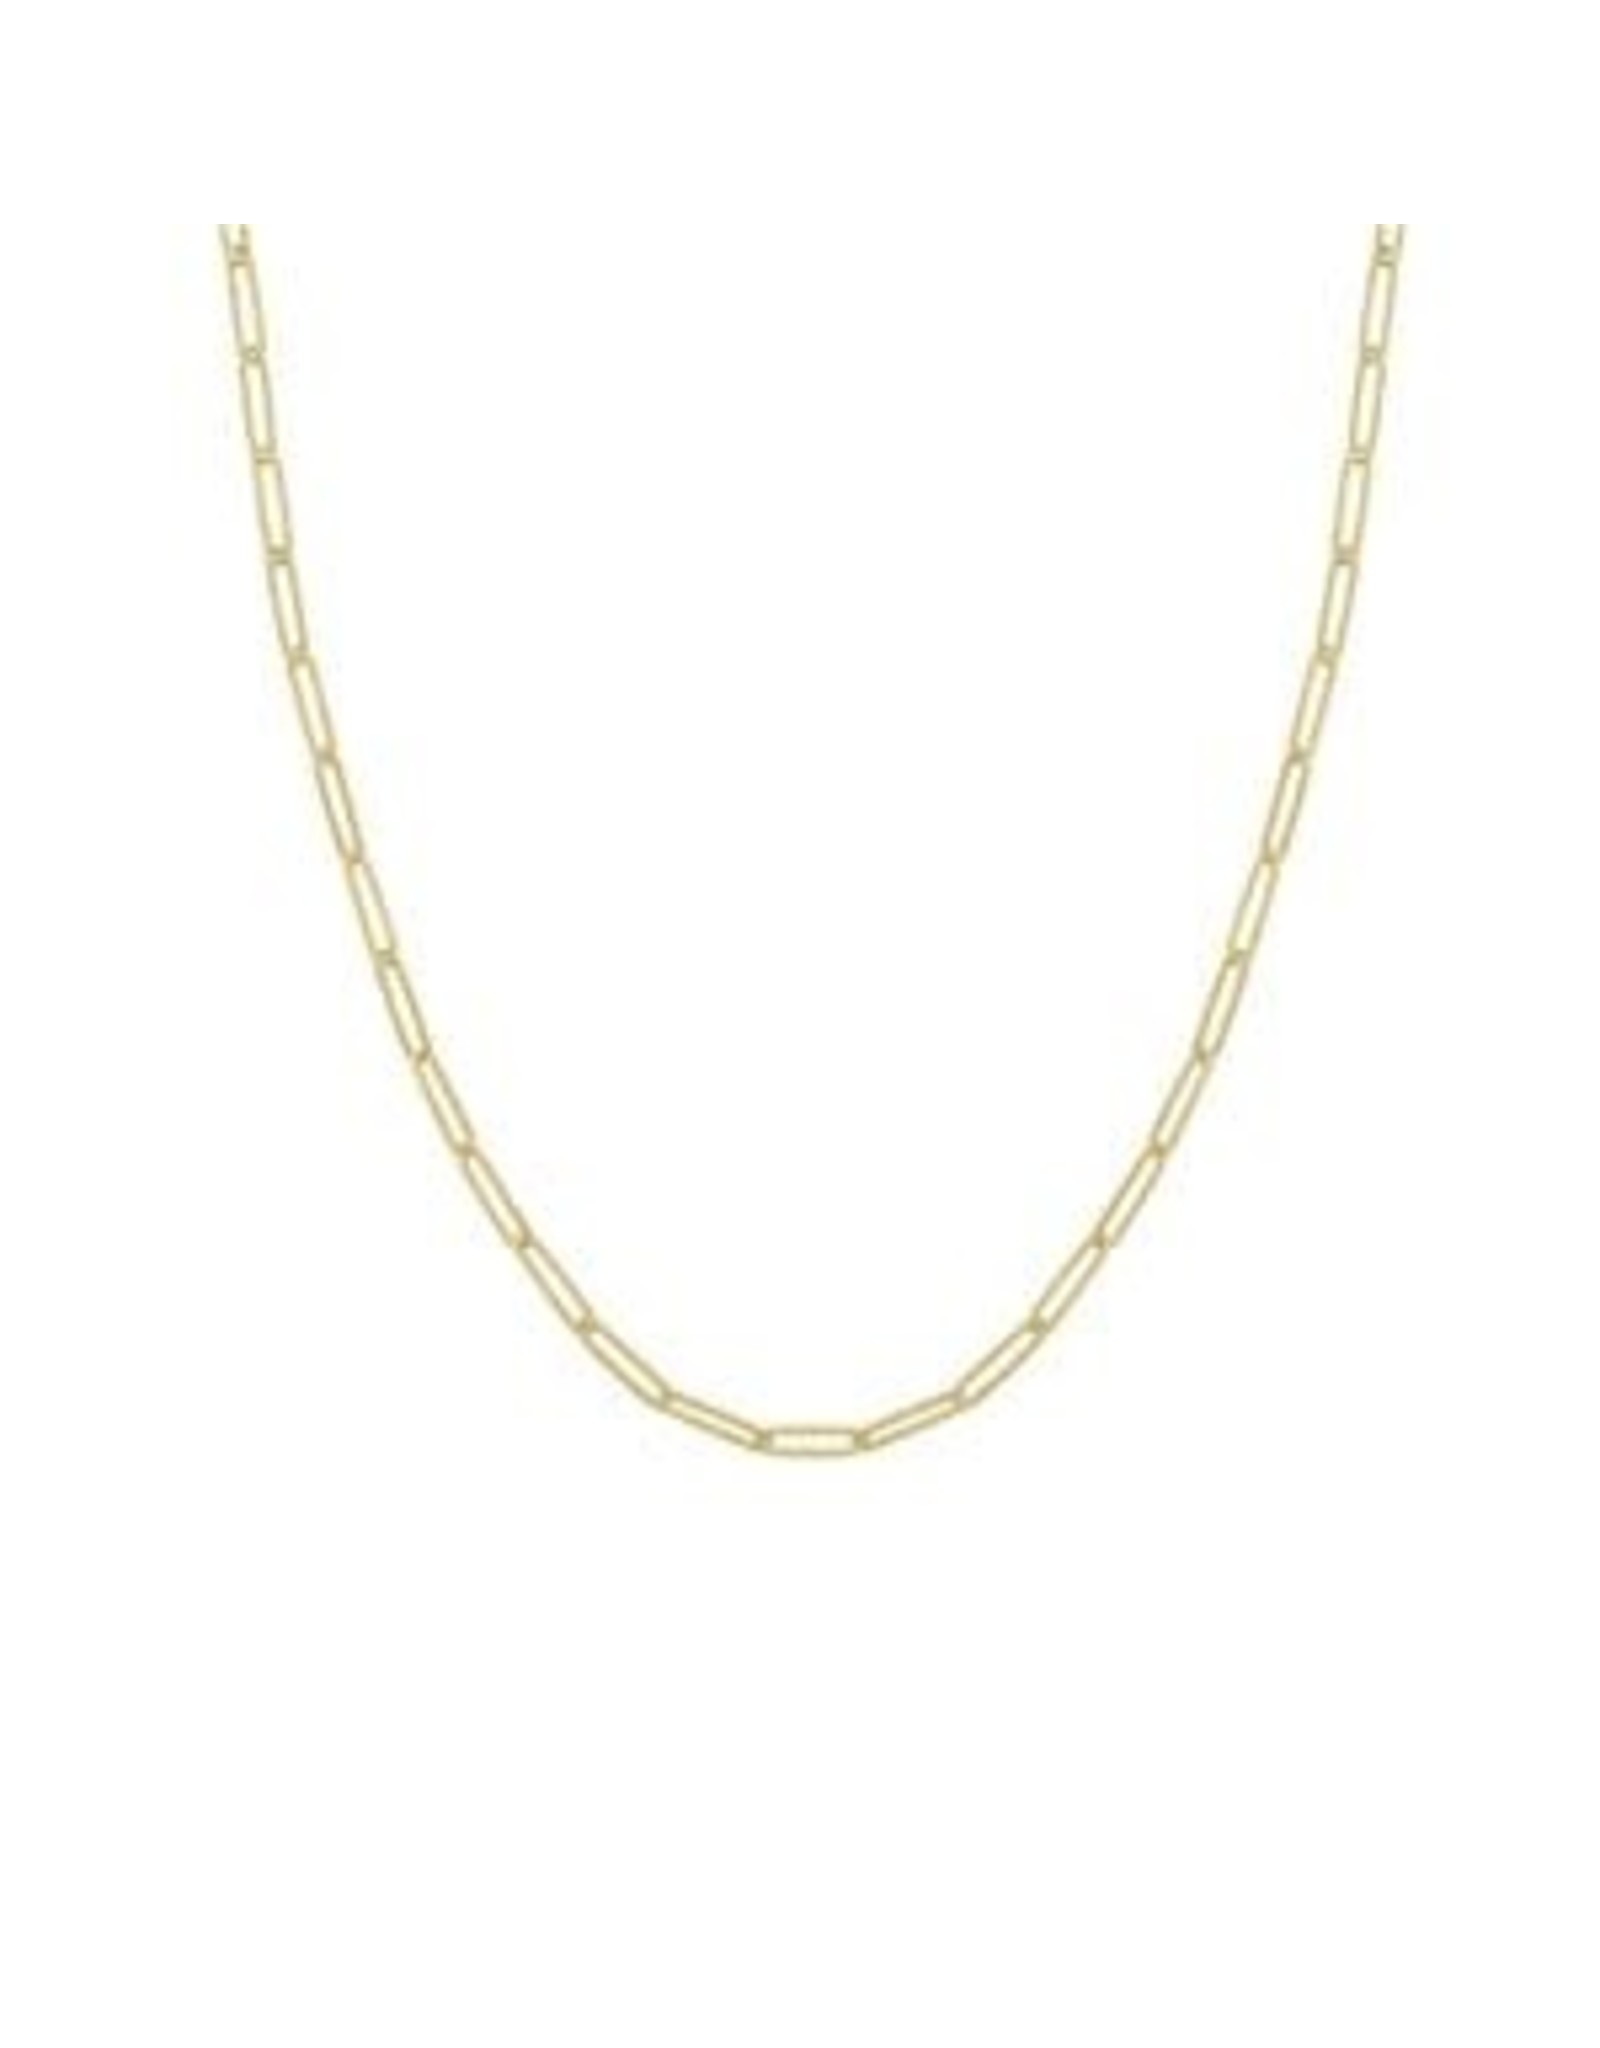 14K Yellow Gold Chunky Light Weight Paperclip Necklace, 18.5", 6.50dwts